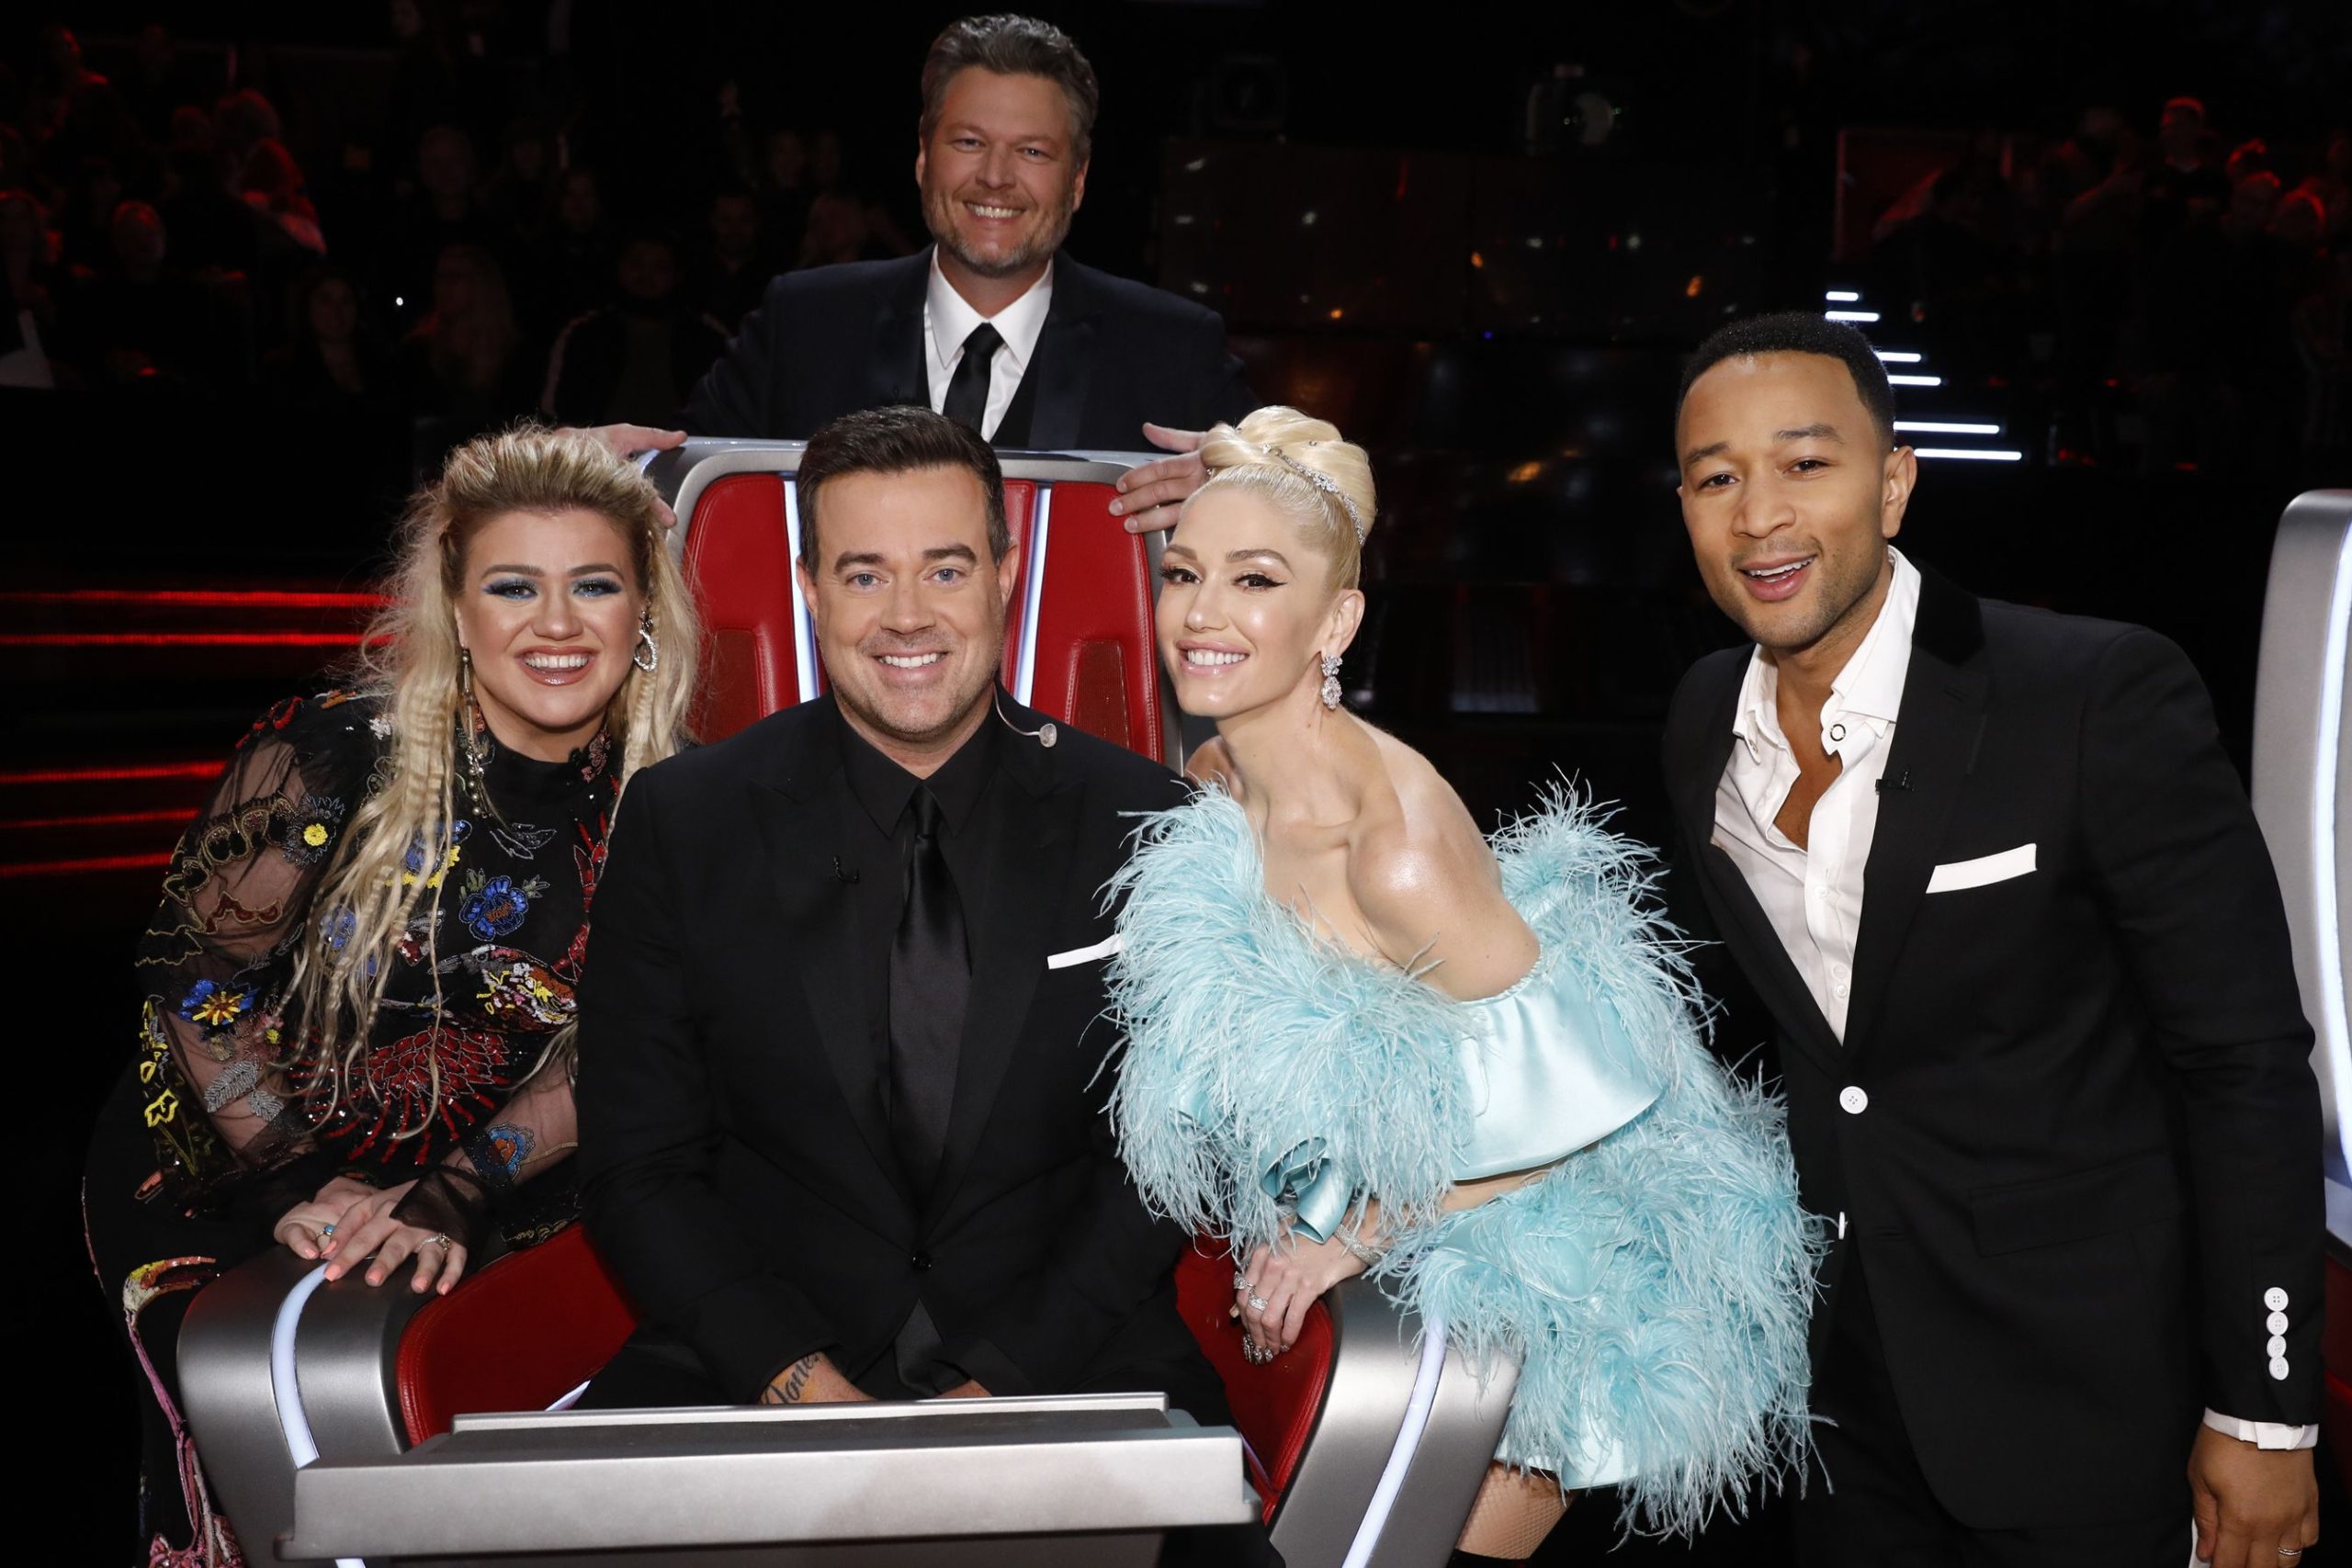 ‘The Voice’ 2020 Start Date: When This Year’s Edition Will Air on NBC